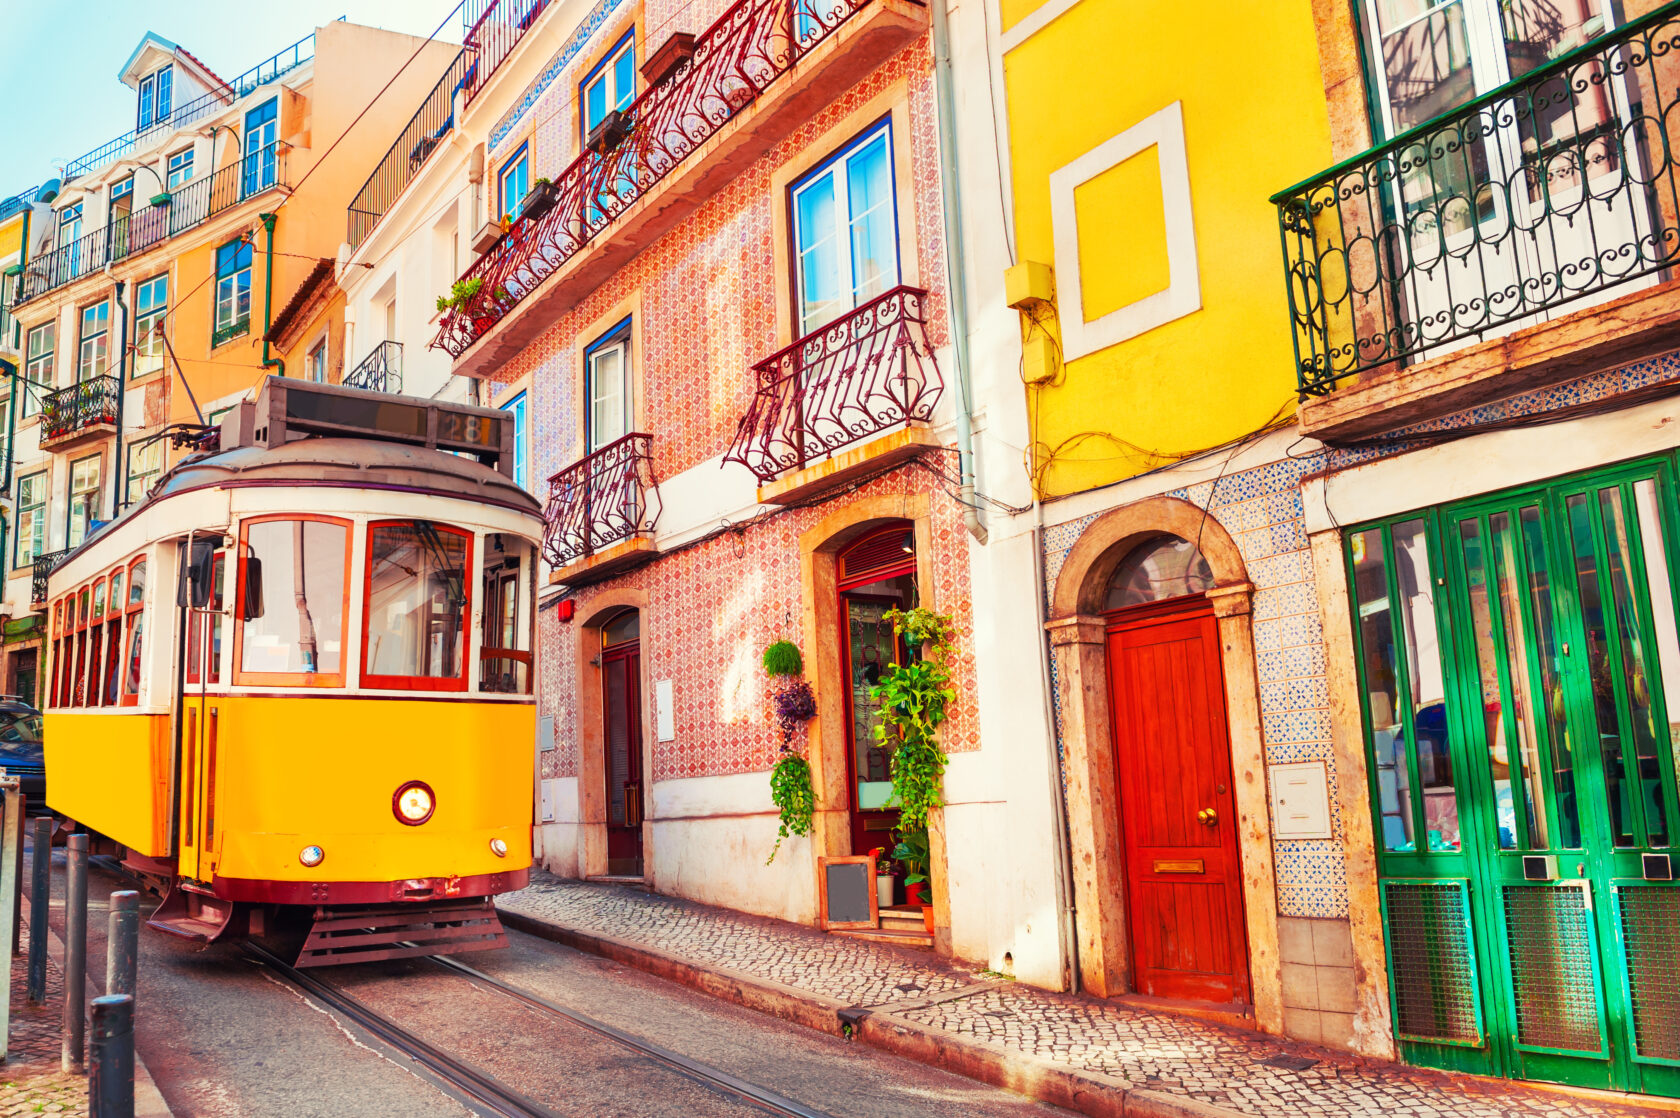 A street view with a vintage tram in Lisbon, Portugal (an Atlantis site).